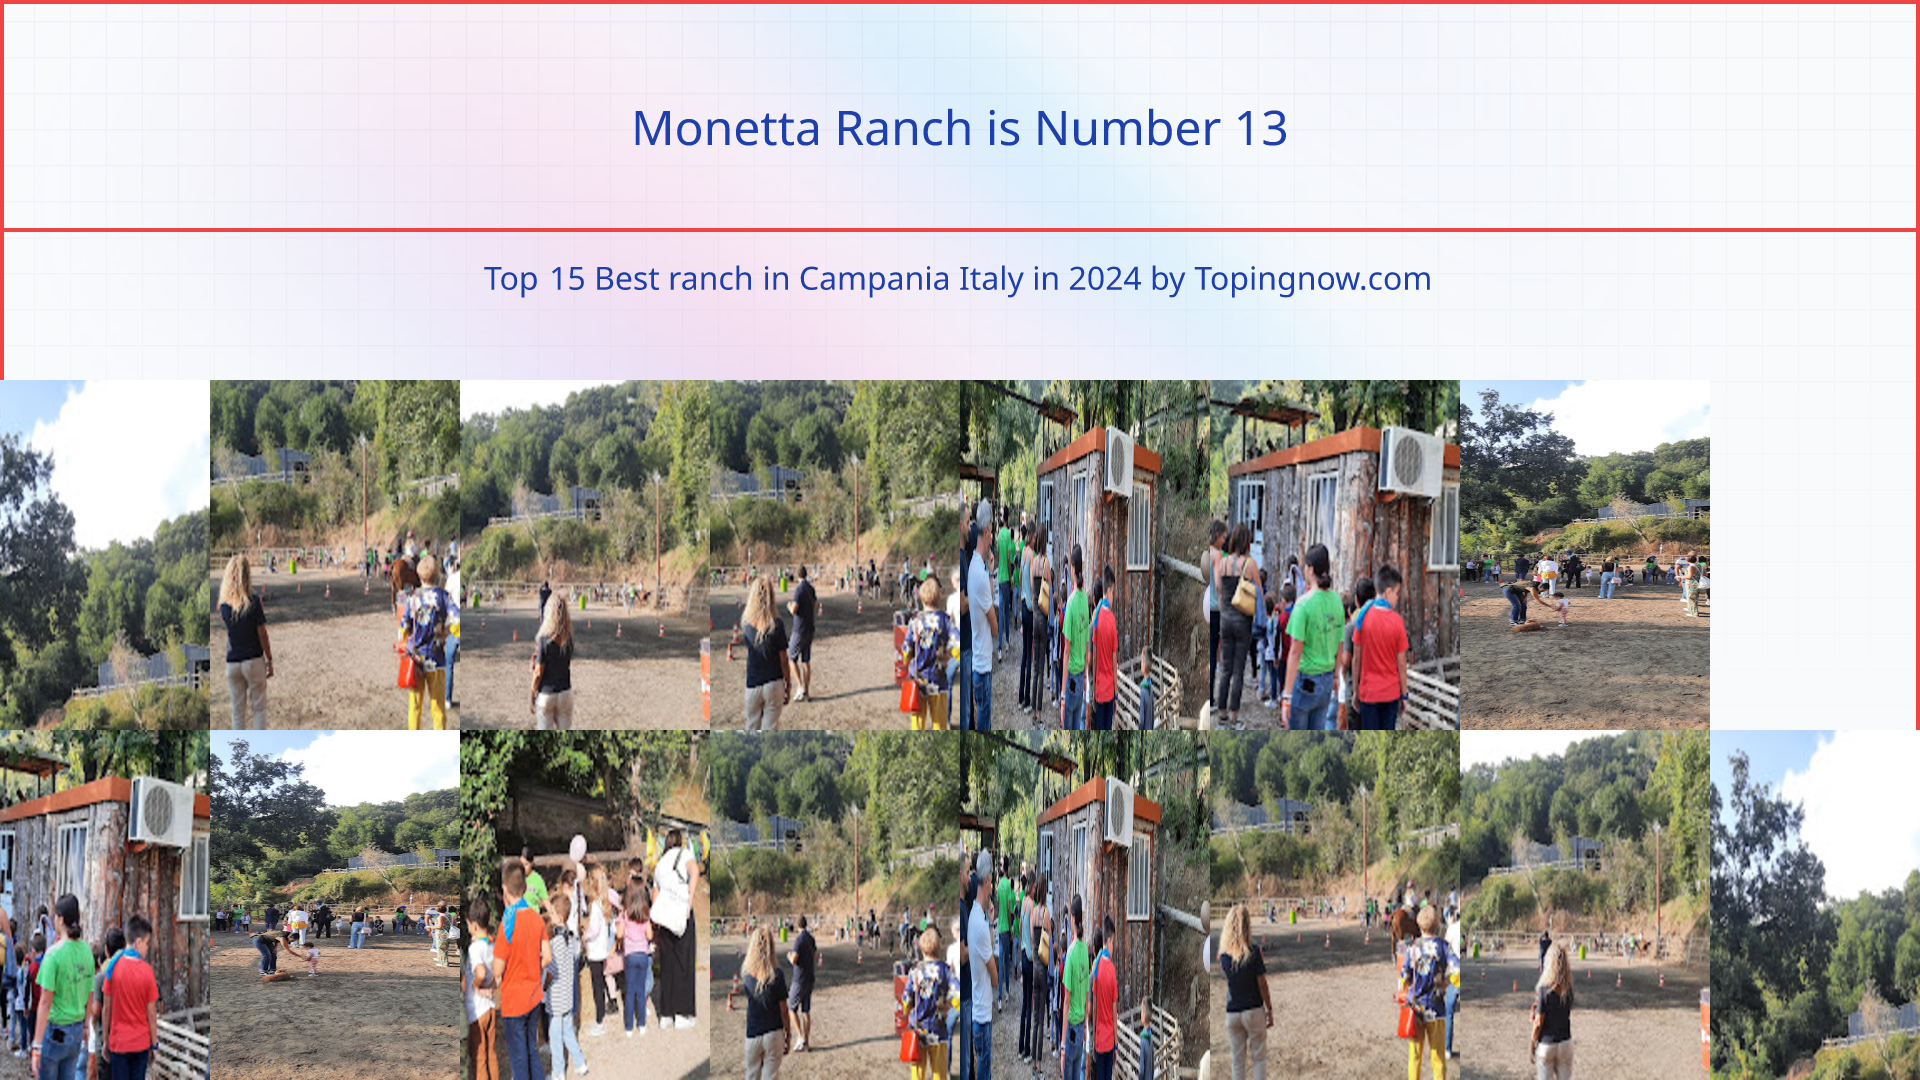 Monetta Ranch: Top 15 Best ranch in Campania Italy in 2024